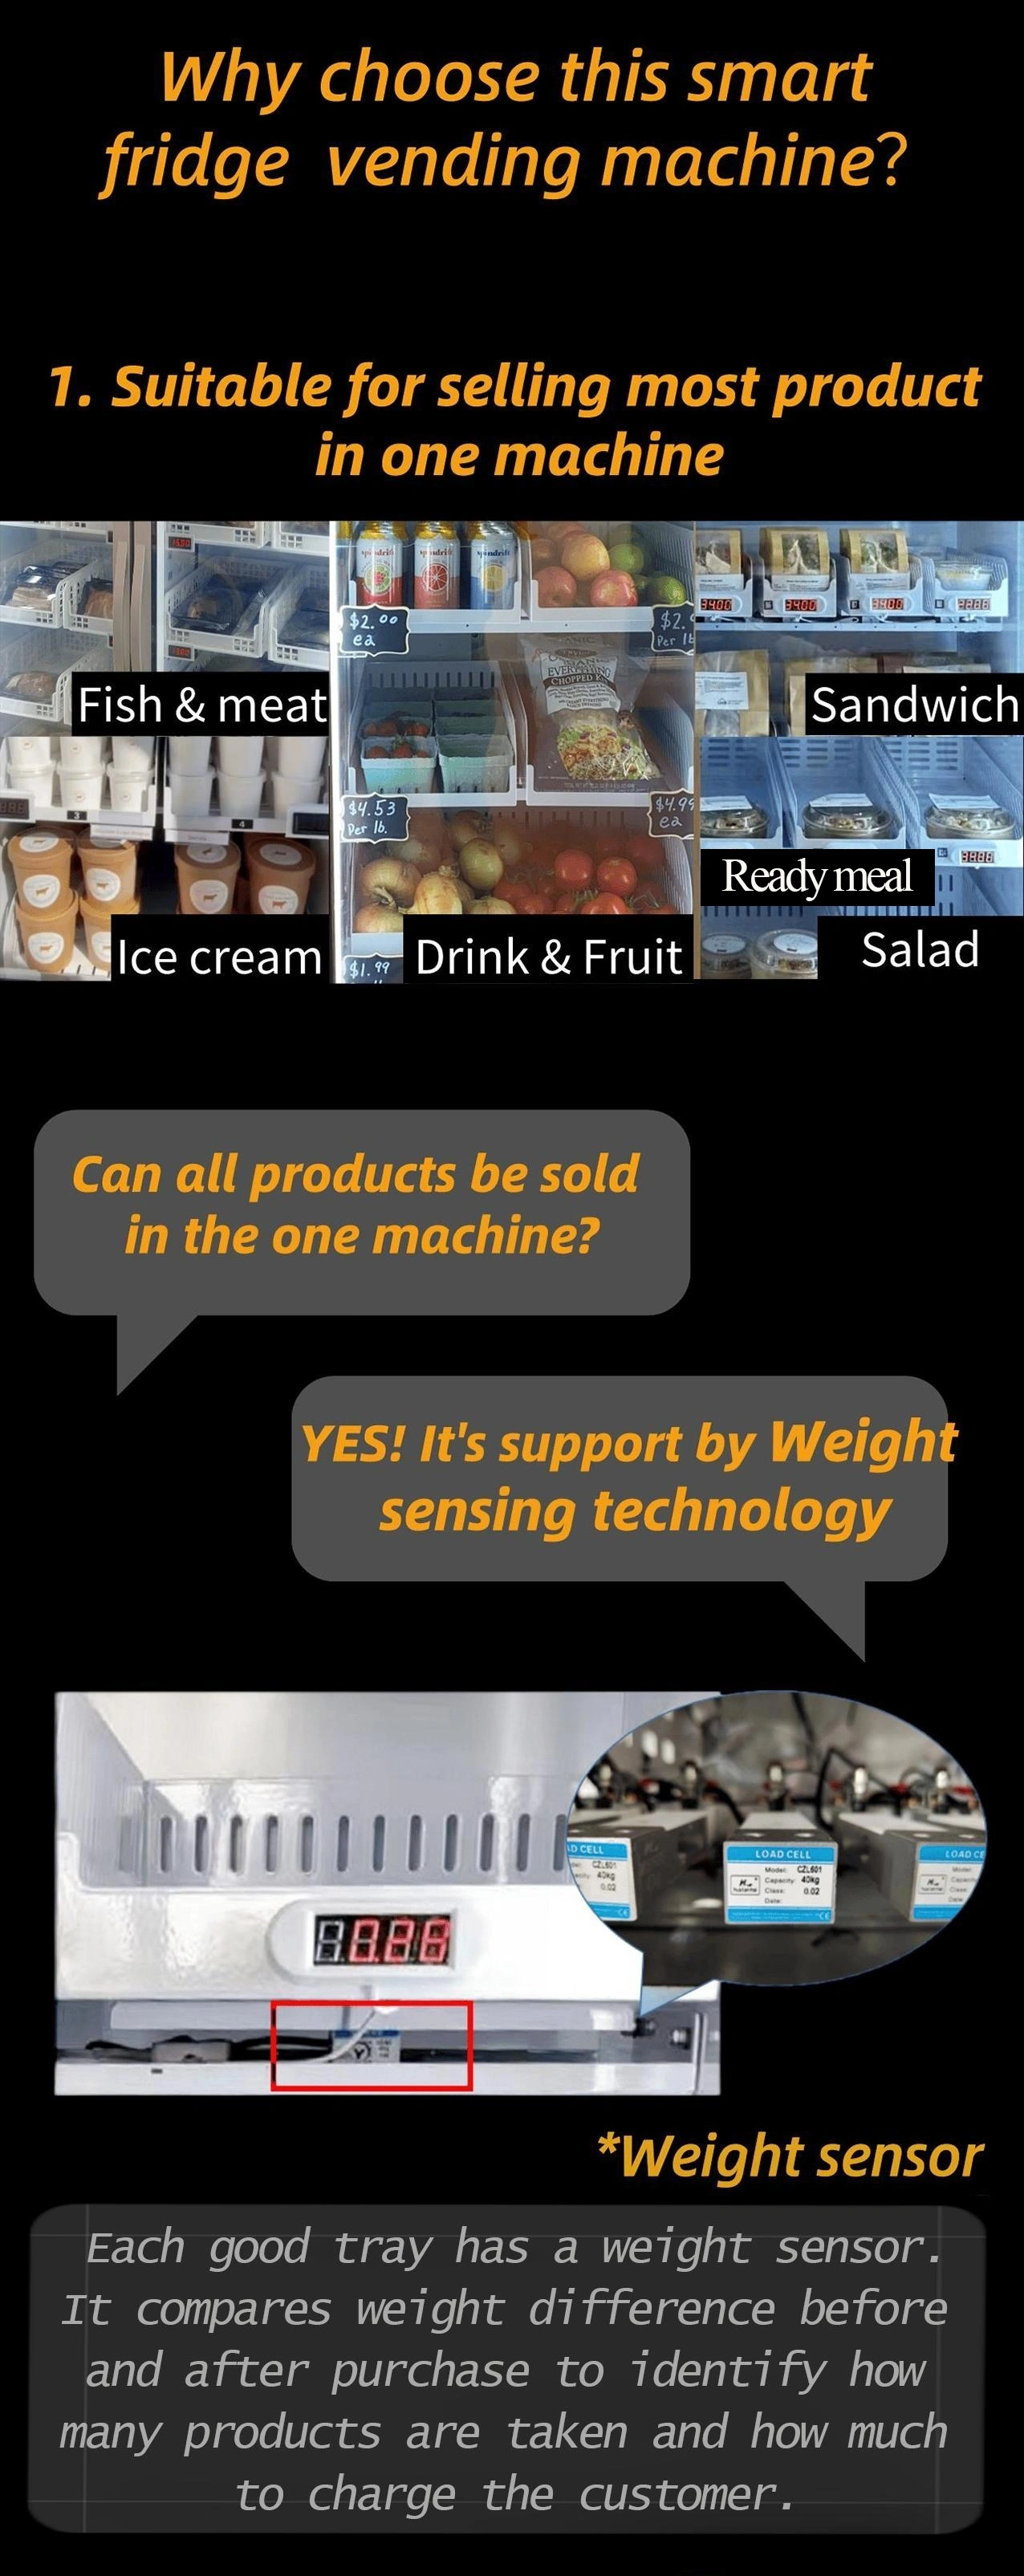 why choose Smart Freezer Vending Machine for Pre-made Meal suitable for selling most product in one machine